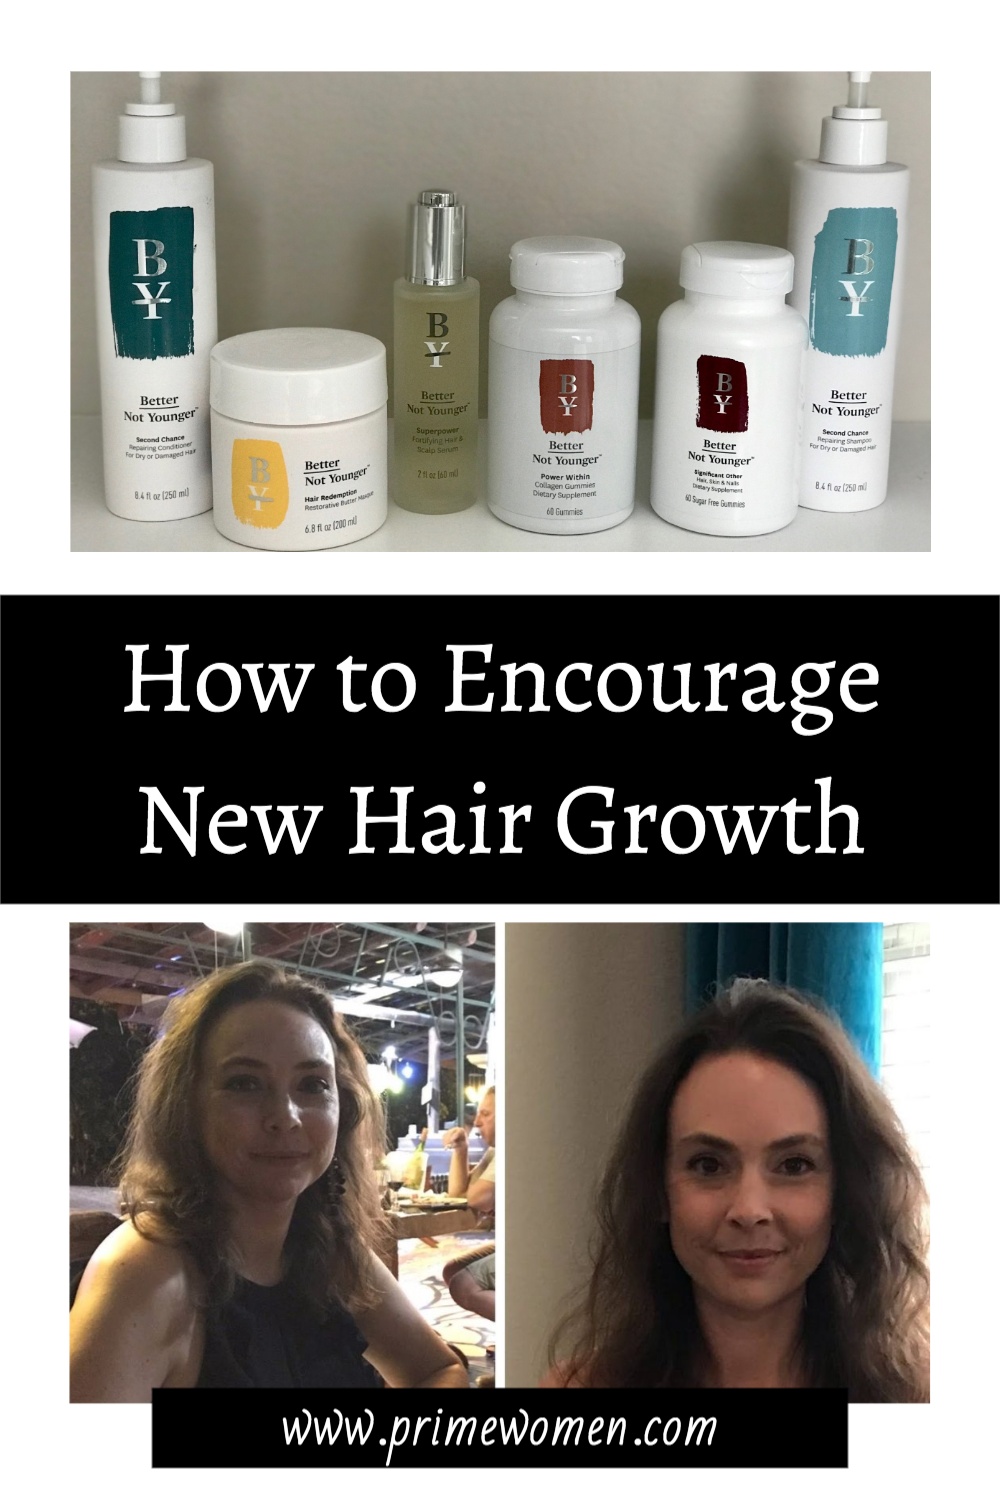 How to encourage new hair growth